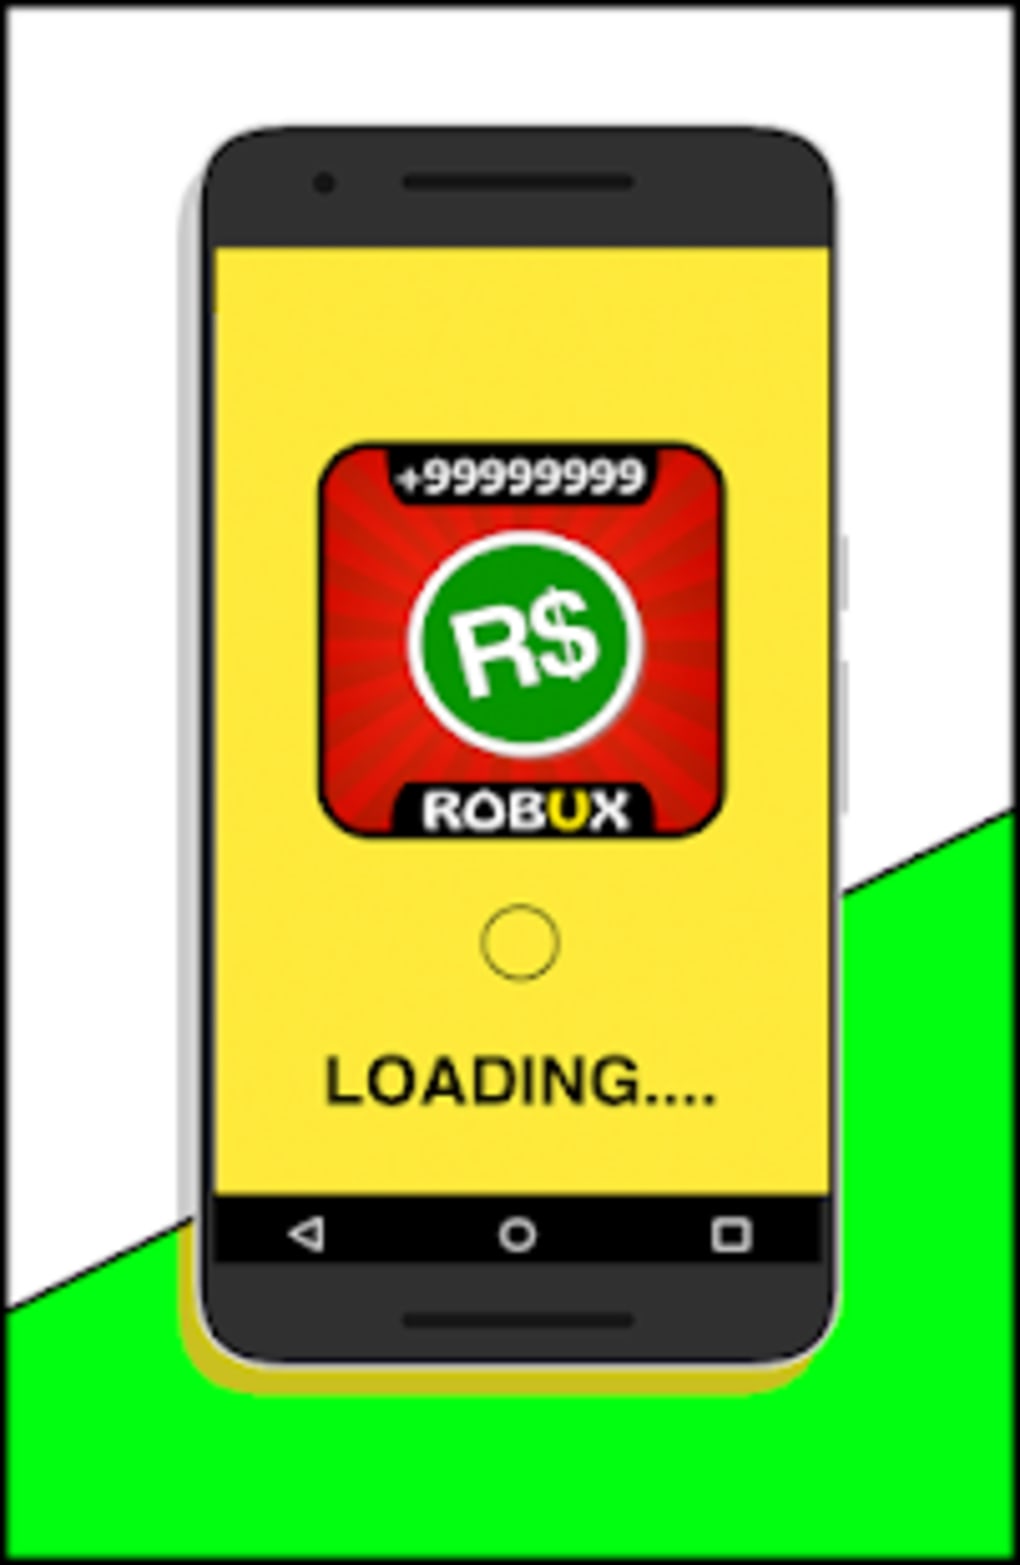 New Free Robux Tips Pro 2k19 For Android Download - free robux 2k19 new tips to get robux free 10 apk com